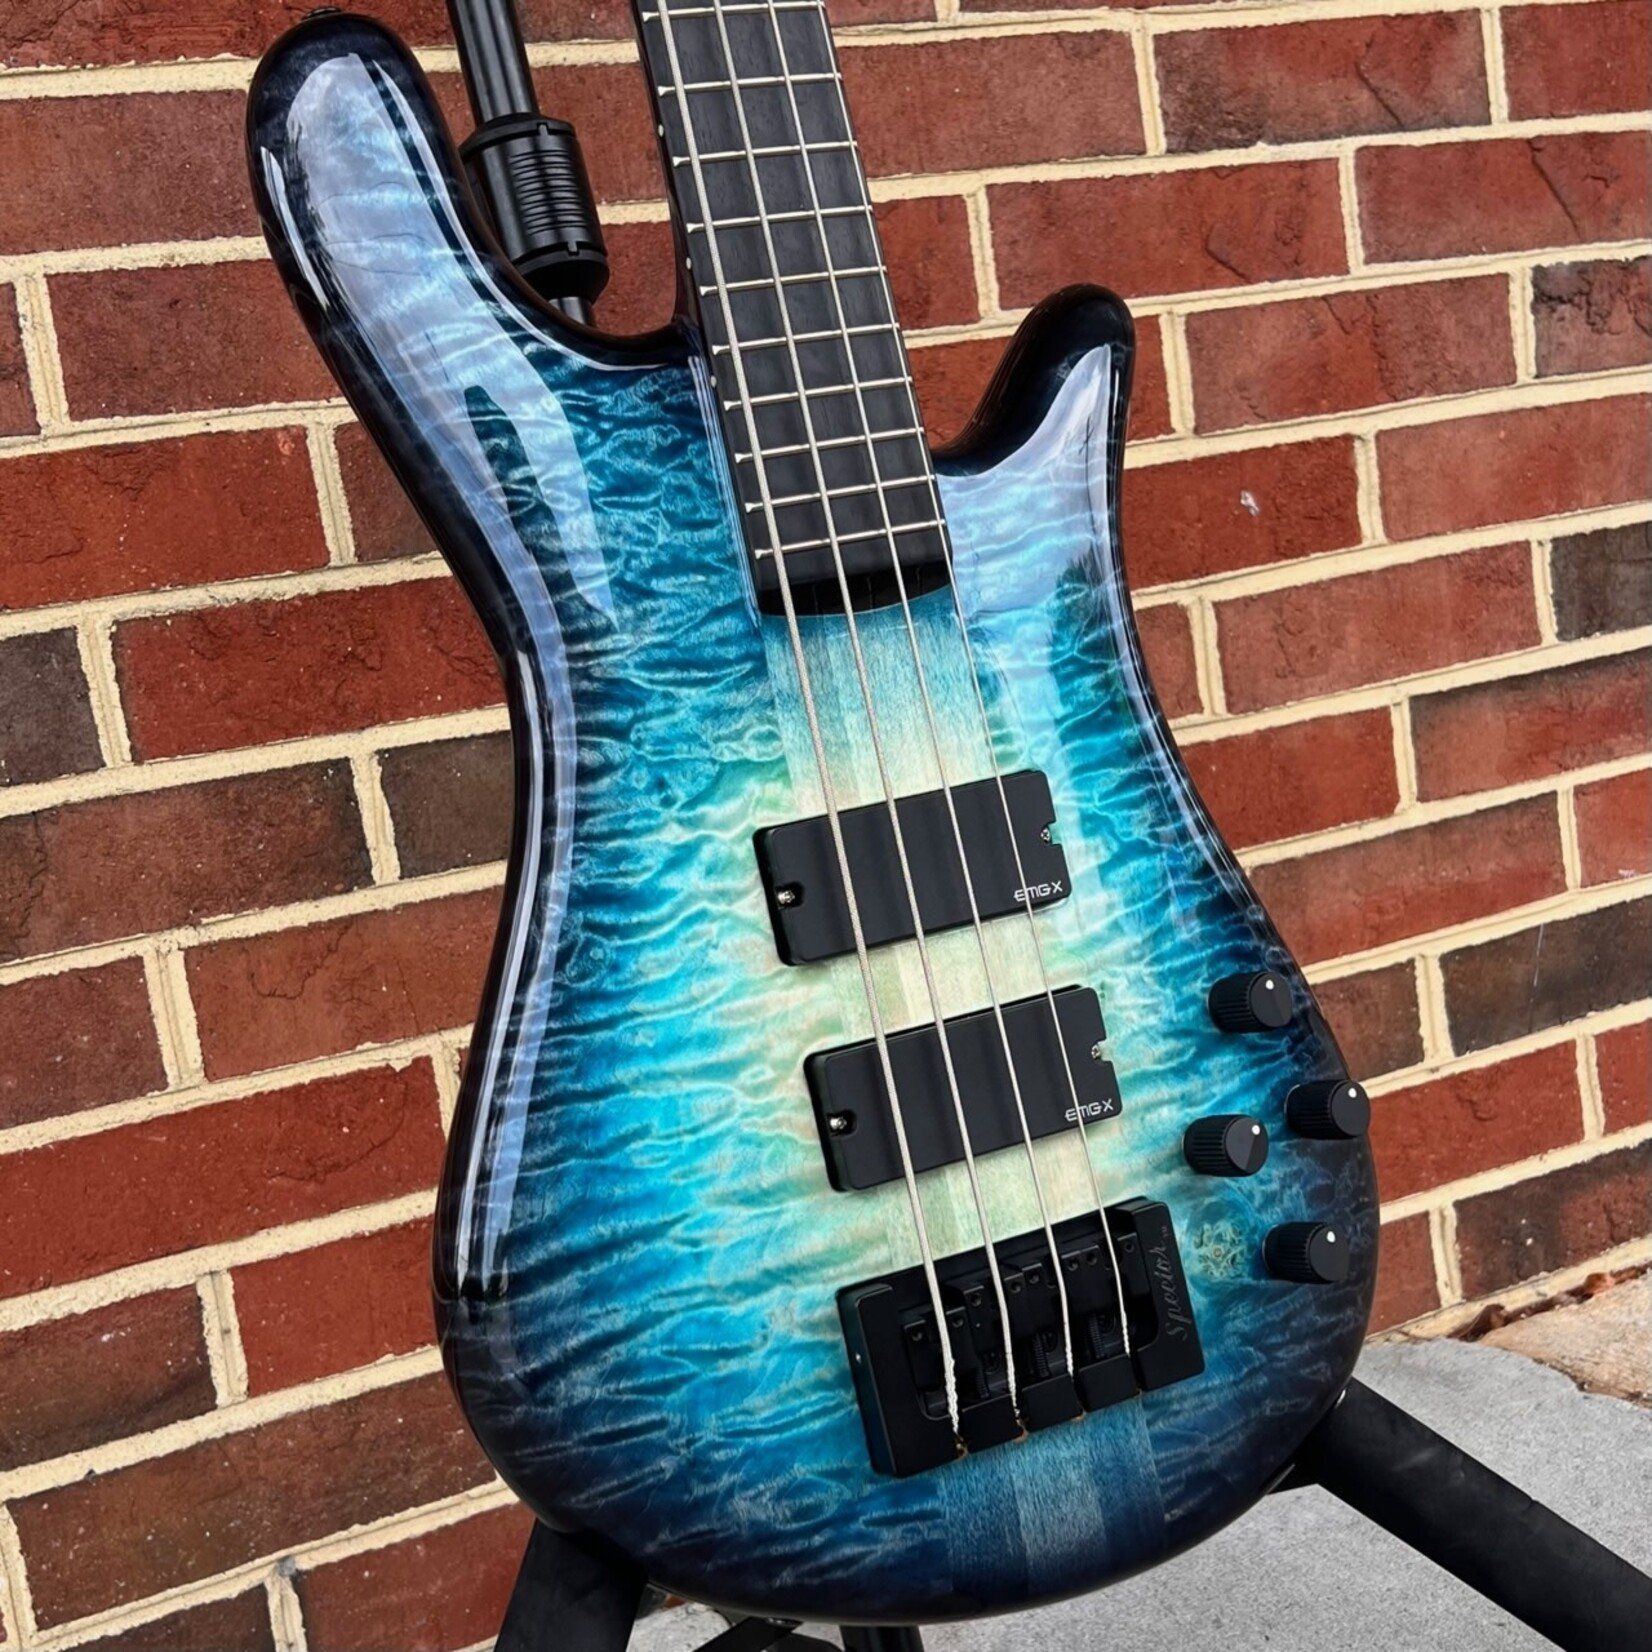 Spector Spector USA NS-2, The Music Loft 30th Anniversary, Glacier Burst, Solid Quilted Maple Wings, 3pc Maple Neck, Ebony Fretboard, Abalone Crown 12th Fret Inlay, Ebony Headstock, EMG 35DCX Pickups, Spector HAZ 9v Preamp, TSA Case